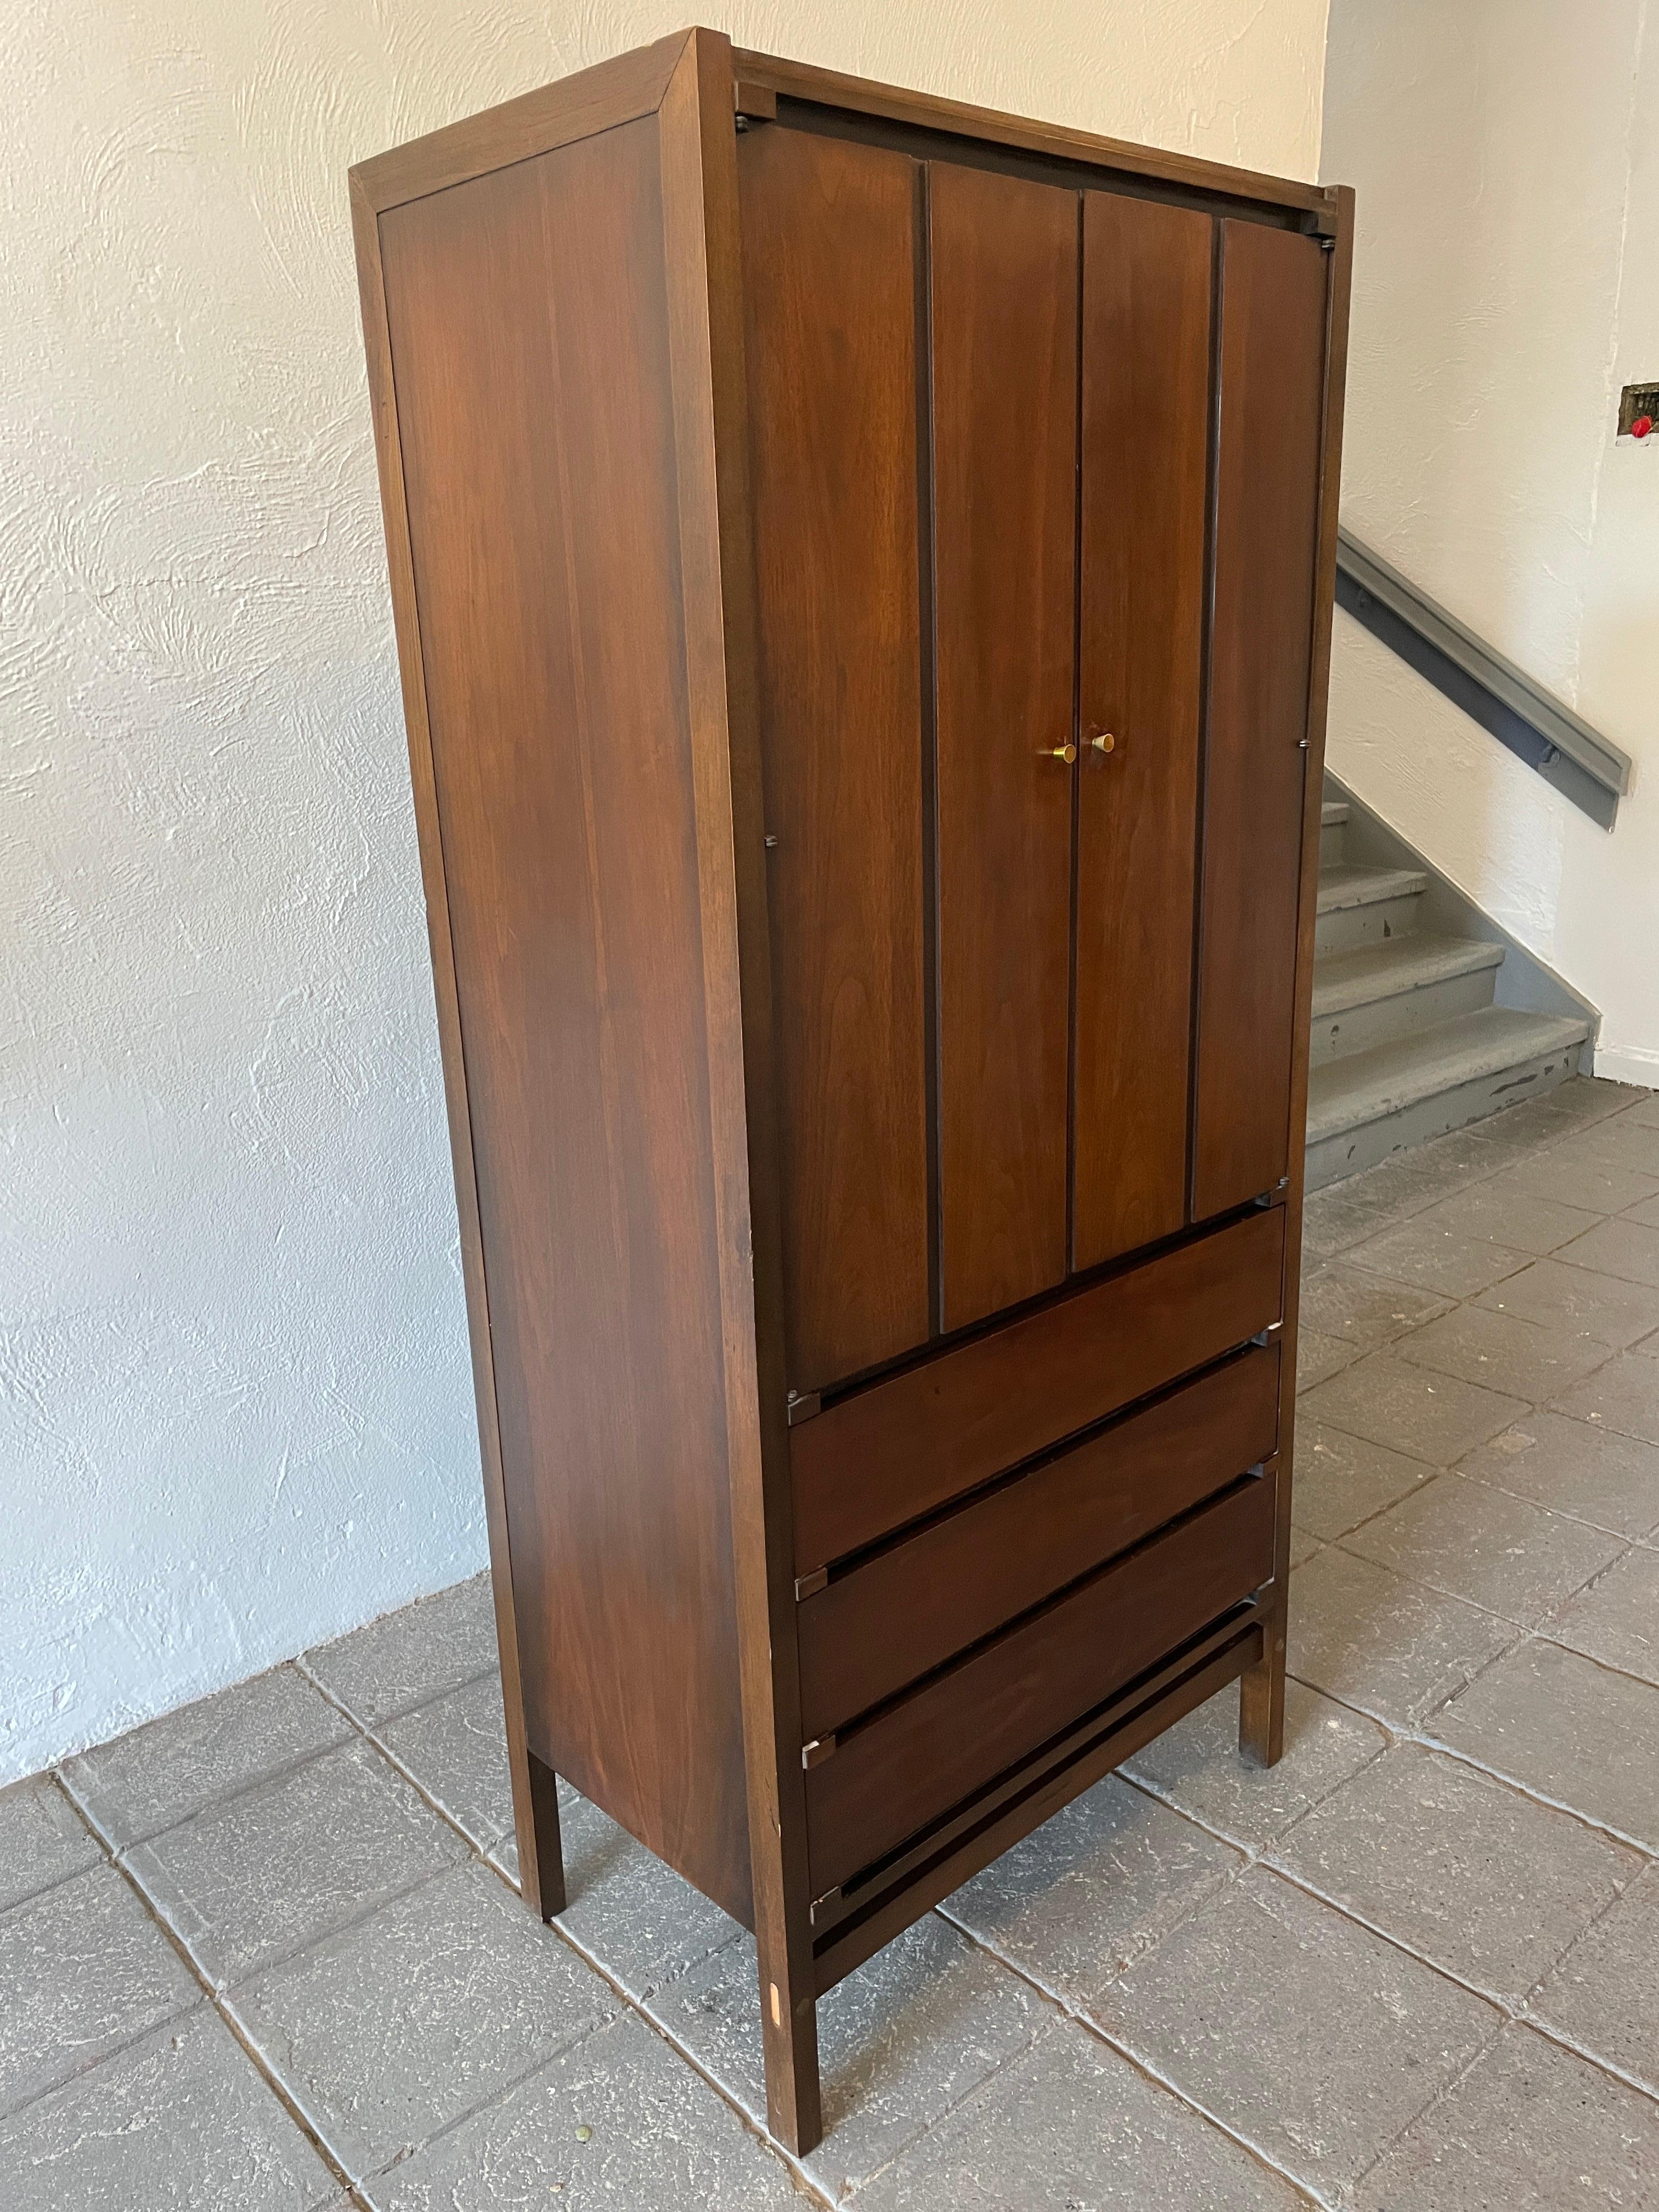 Beautiful midcentury tall walnut and black 3 drawer dresser wardrobe. Very clean all original 1 unit dresser or wardrobe with mirror. All lower drawers are clean and very smooth. Top section has 2 cabinet doors with brass knobs. In side is 1 mirror